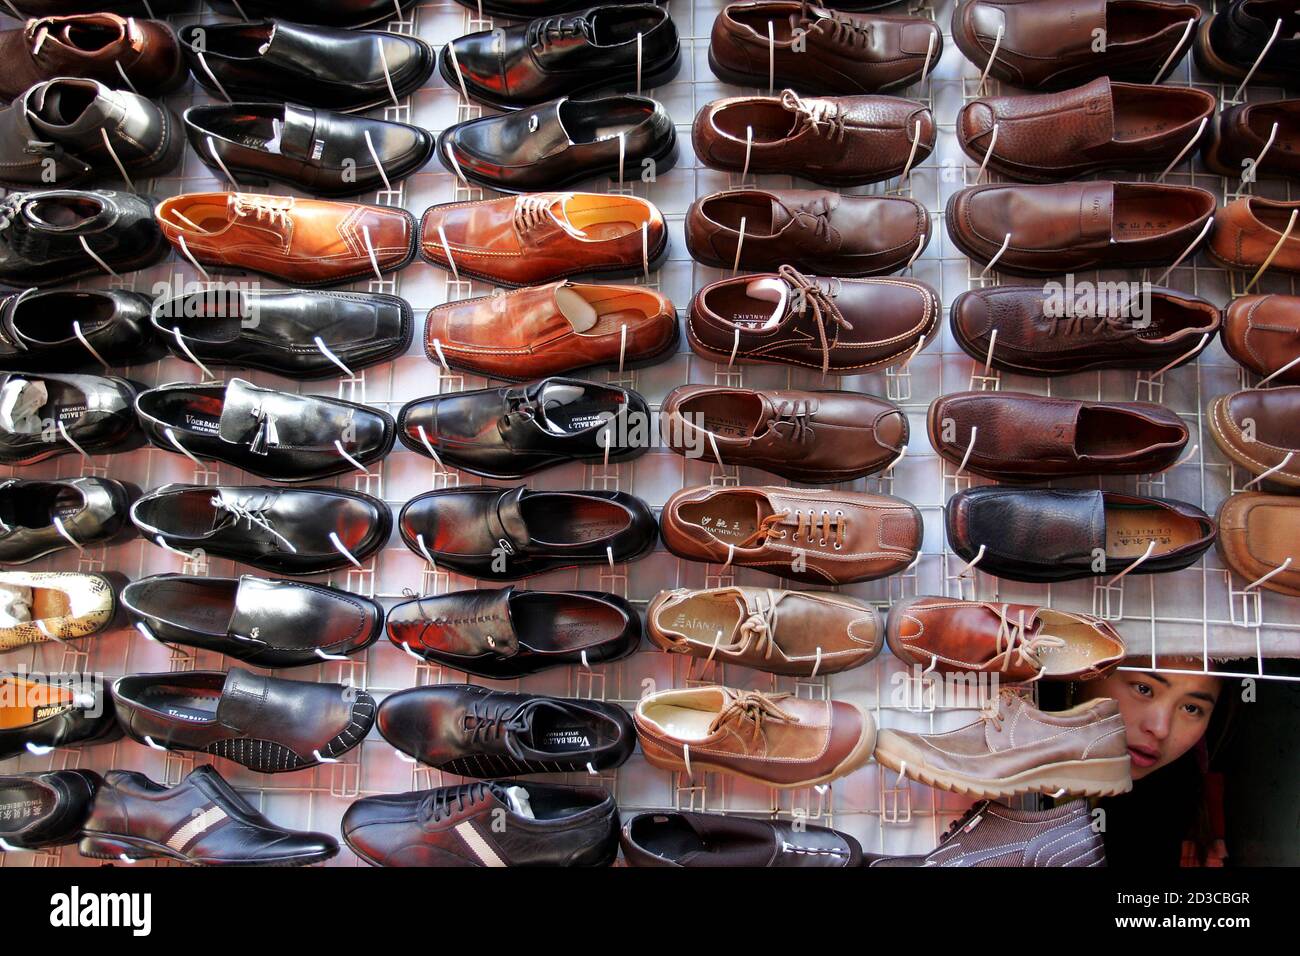 A Chinese vendor peers from behind an array of shoes at a stall in Beijing November 15, 2004. China's retail sales for October rose a faster-than-expected 14.2 percent from a year earlier, their highest growth rate in five months, though some analysts said the strength was due in part to higher consumer prices. China's retail sector was expected to grow 8-10 percent a year until the end of the decade, and could be worth some $2.4 trillion by 2020, state media said. Pictures of the month November 2004  REUTERS/Claro Cortes IV Stock Photo